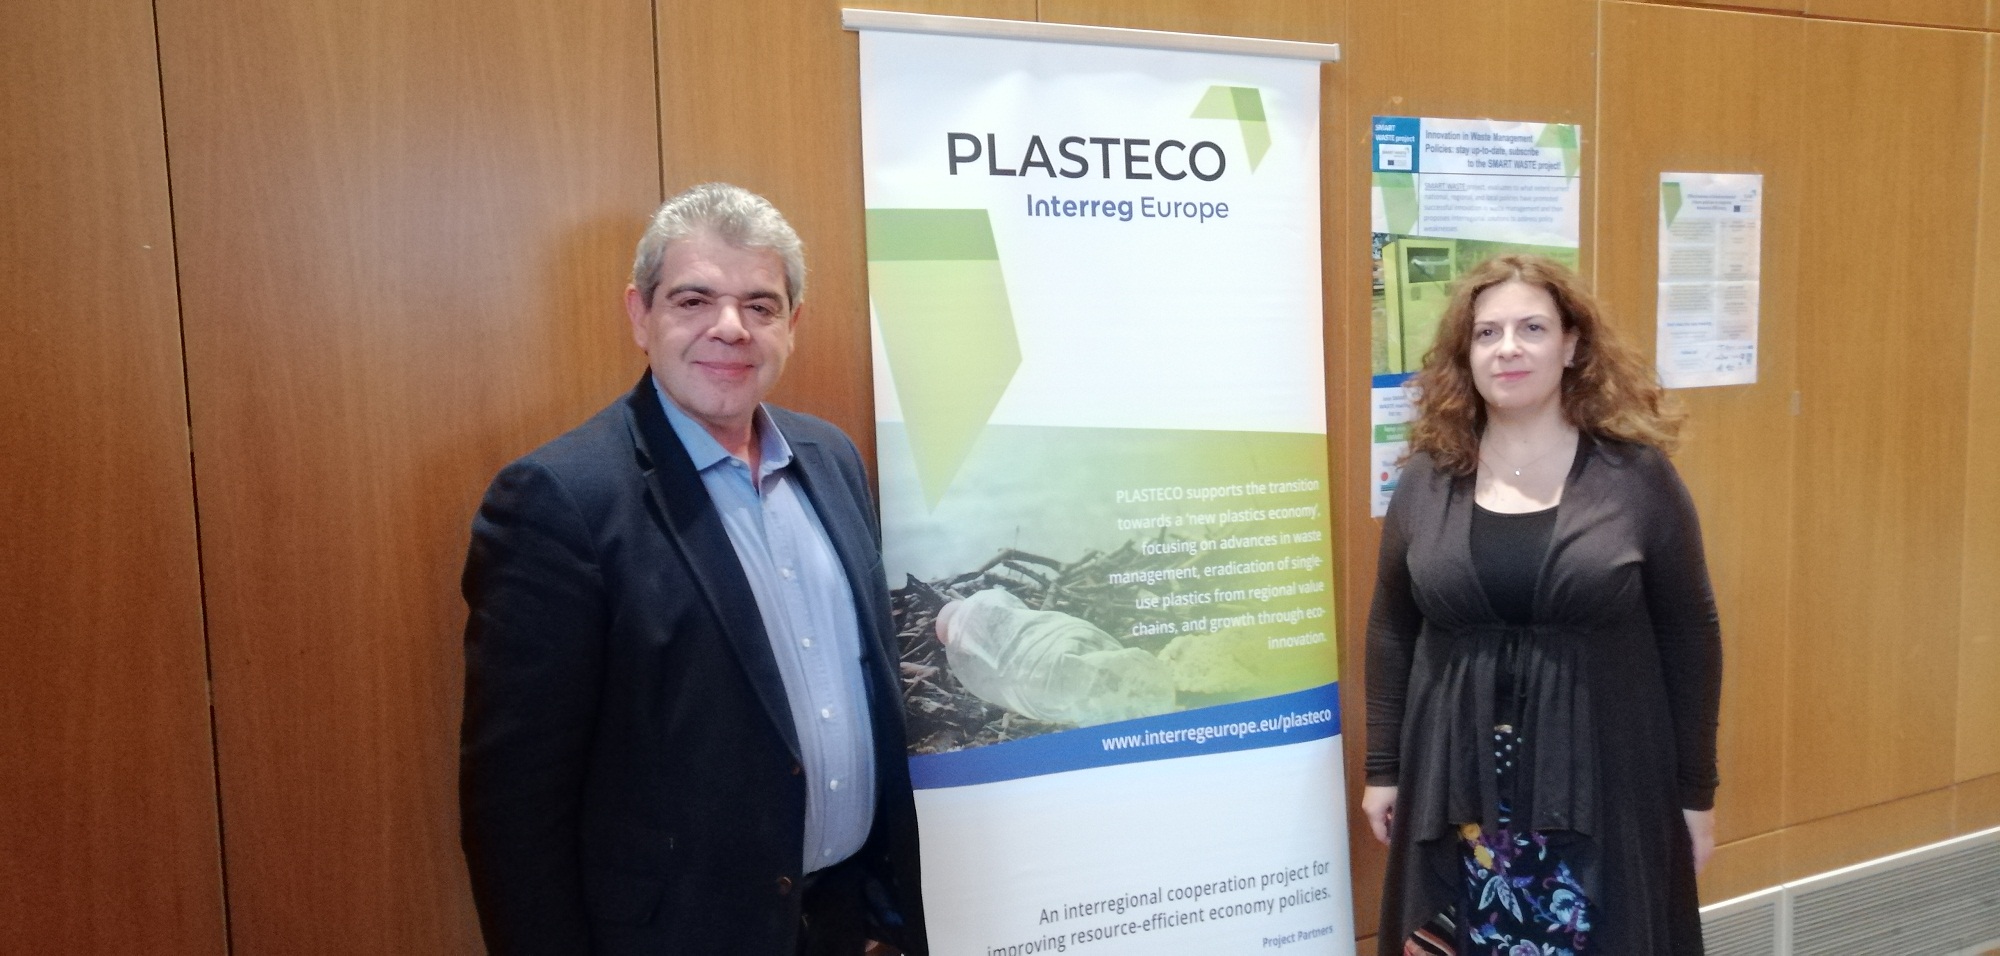 PLASTECO 3rd party event in Thessaloniki, Greece